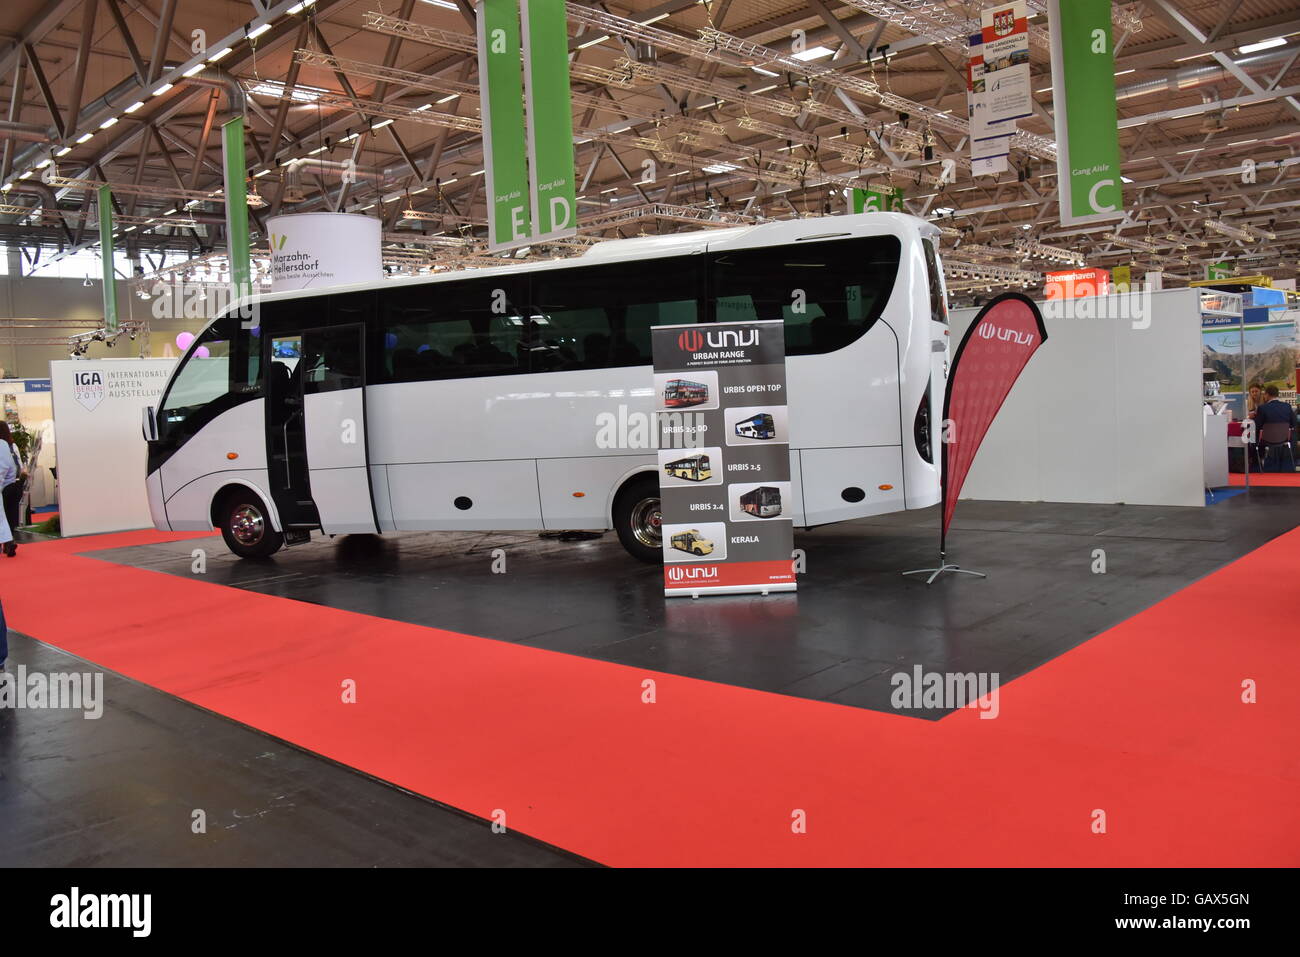 A bus made by Spanish coach manufacturer UNVI Unidad de Vehiculos Industriales S.A seen at the RDA Workshop, an international trade fair for travel coach tourism and group tours, in Cologne, Germany, 06 July 2016. Photo: Horst Galuschka/dpa - NO WIRE SERVICE - Stock Photo